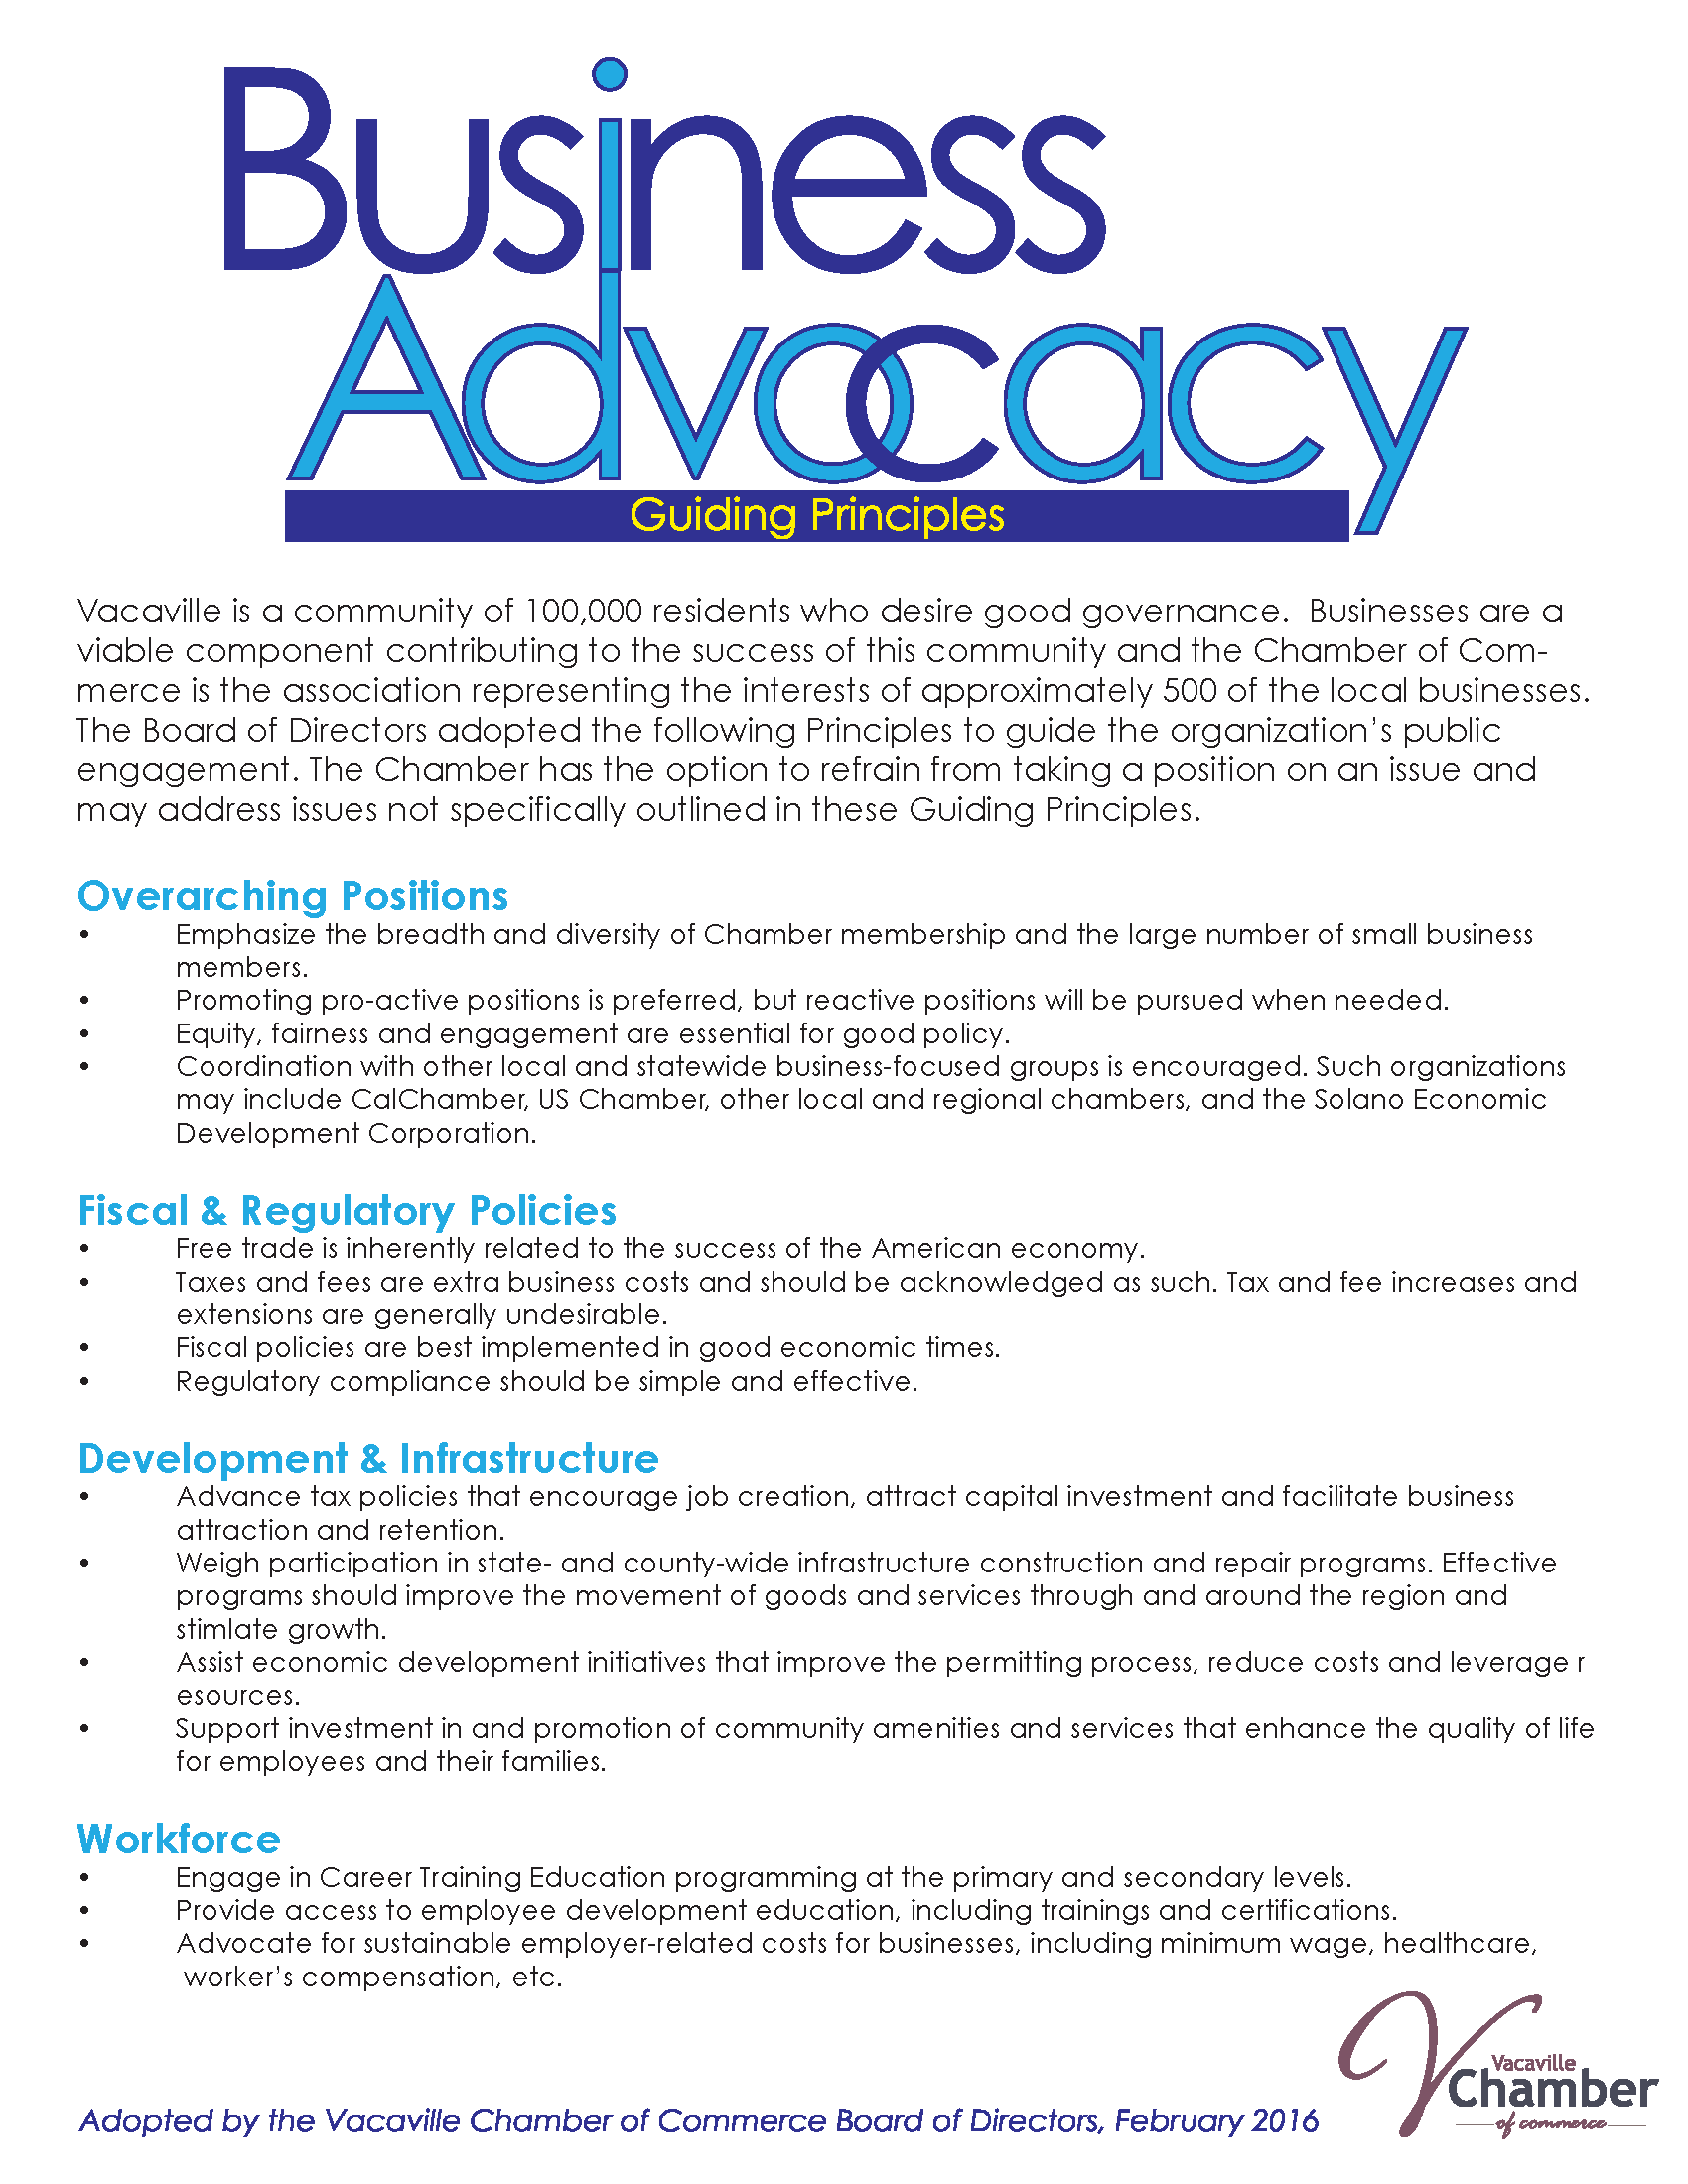 Business-Advocacy-Guidelines-2016